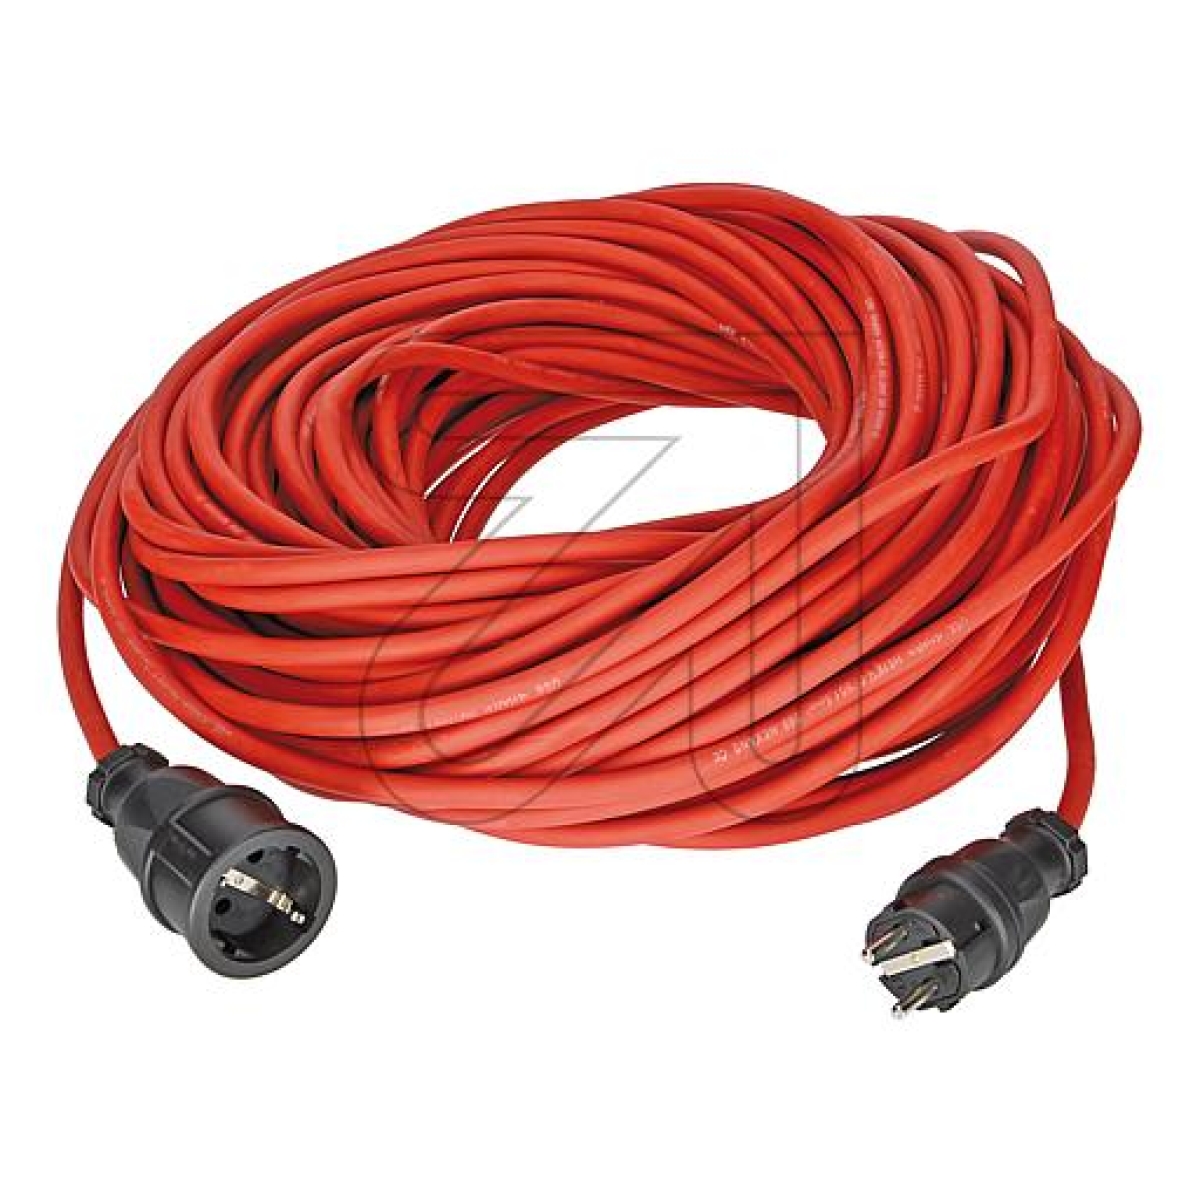 EGBRubber extension H07RN-F 3G1.5 red 50m 100999Article-No: 042795